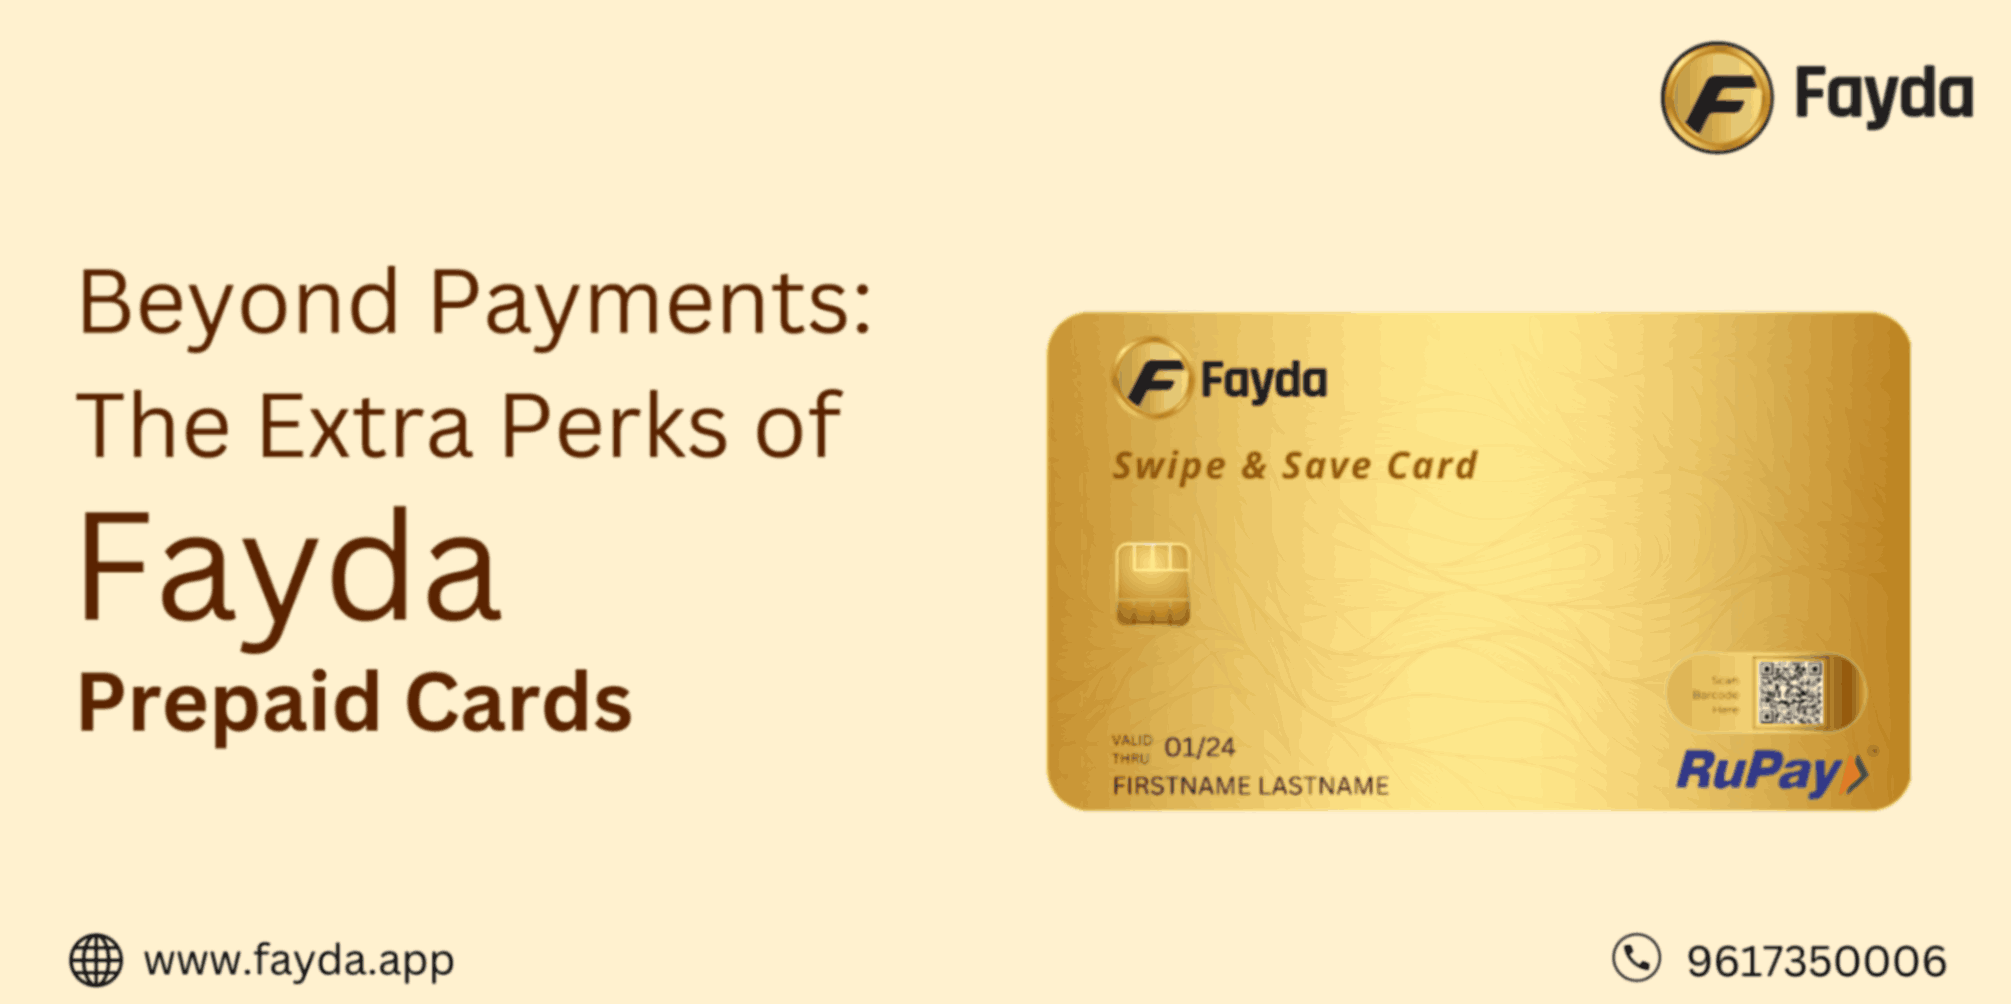 Beyond Payments The Extra Perks of Fayda Prepaid Cards